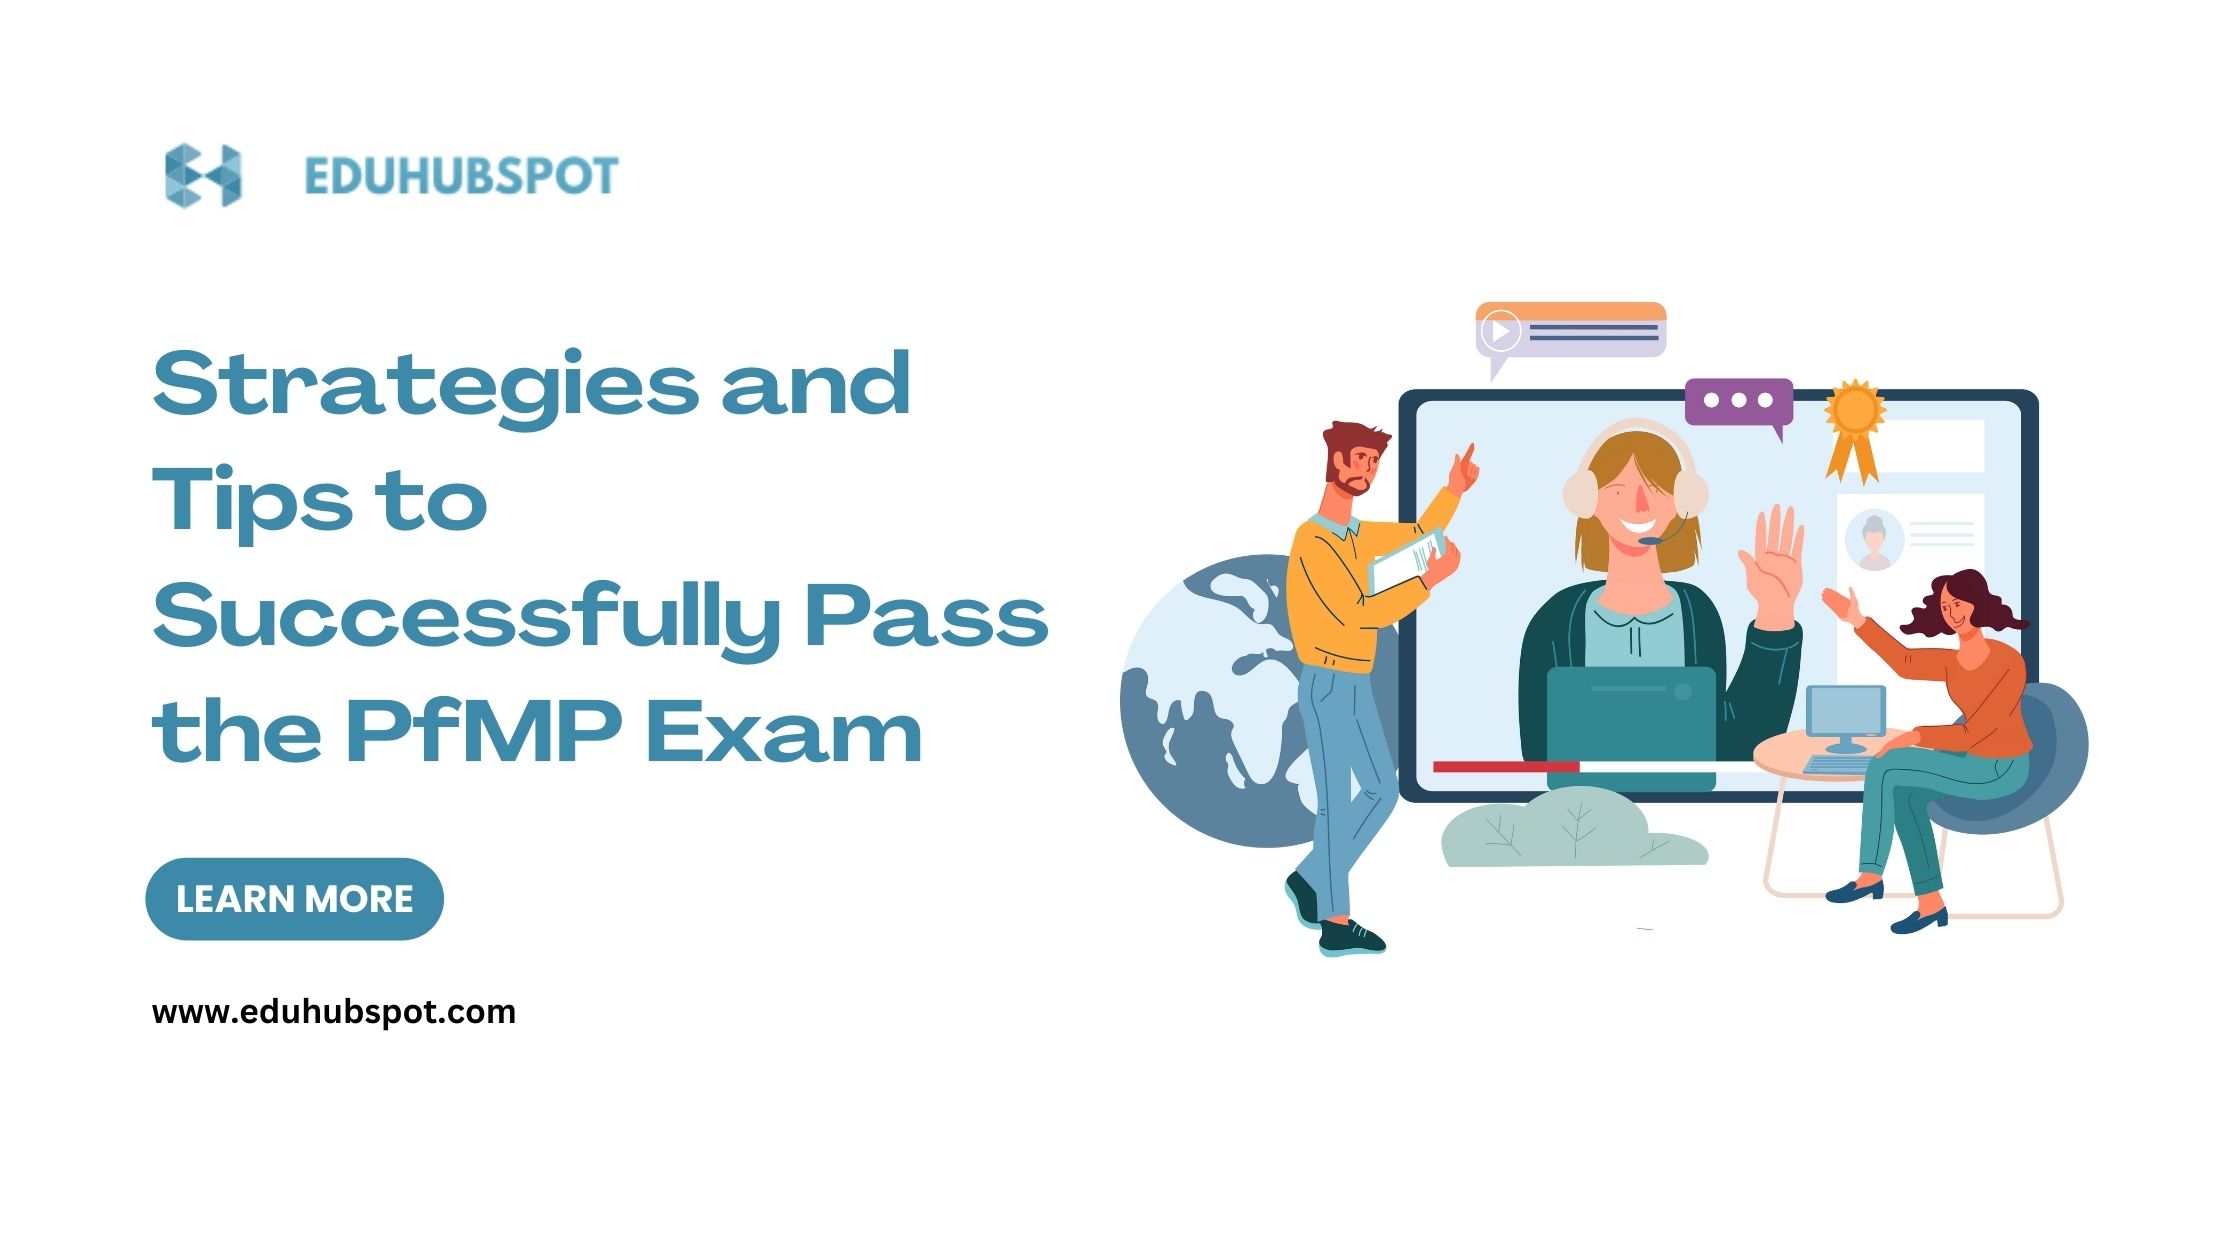 Strategies and Tips to Successfully Pass the PfMP Exam